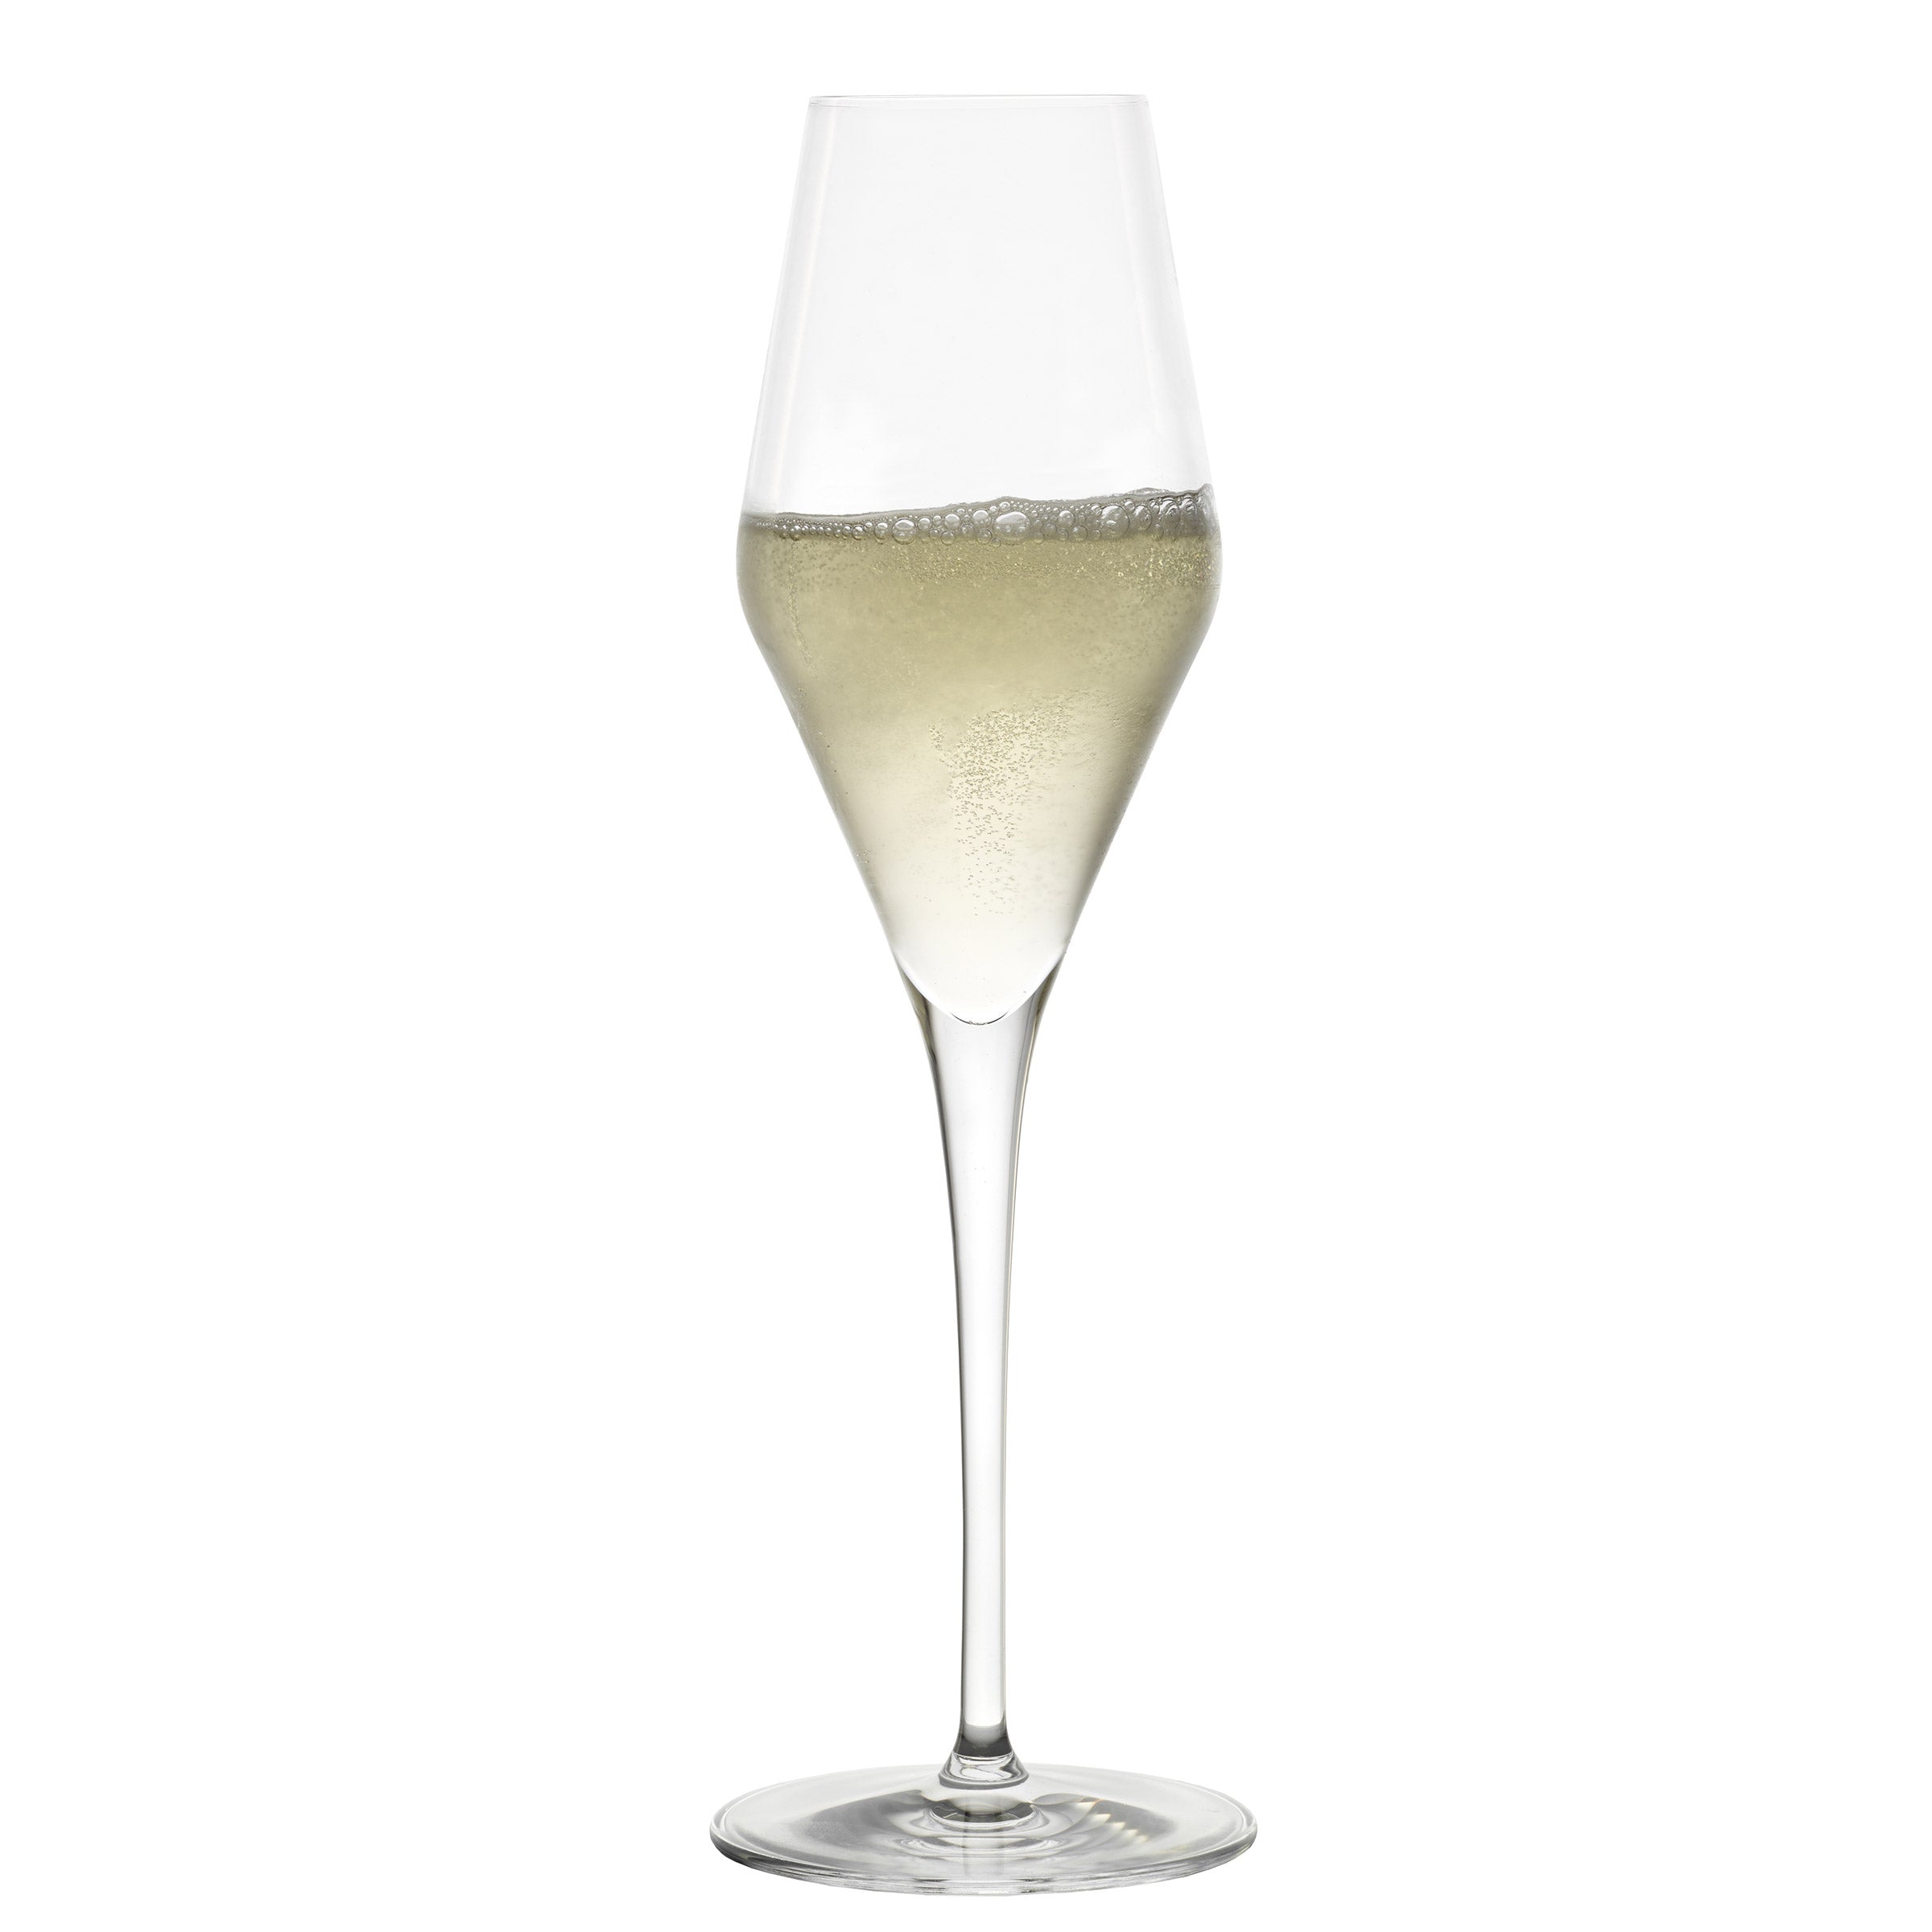 Highlight Champagne Flutes with LED Lights, Set of 2